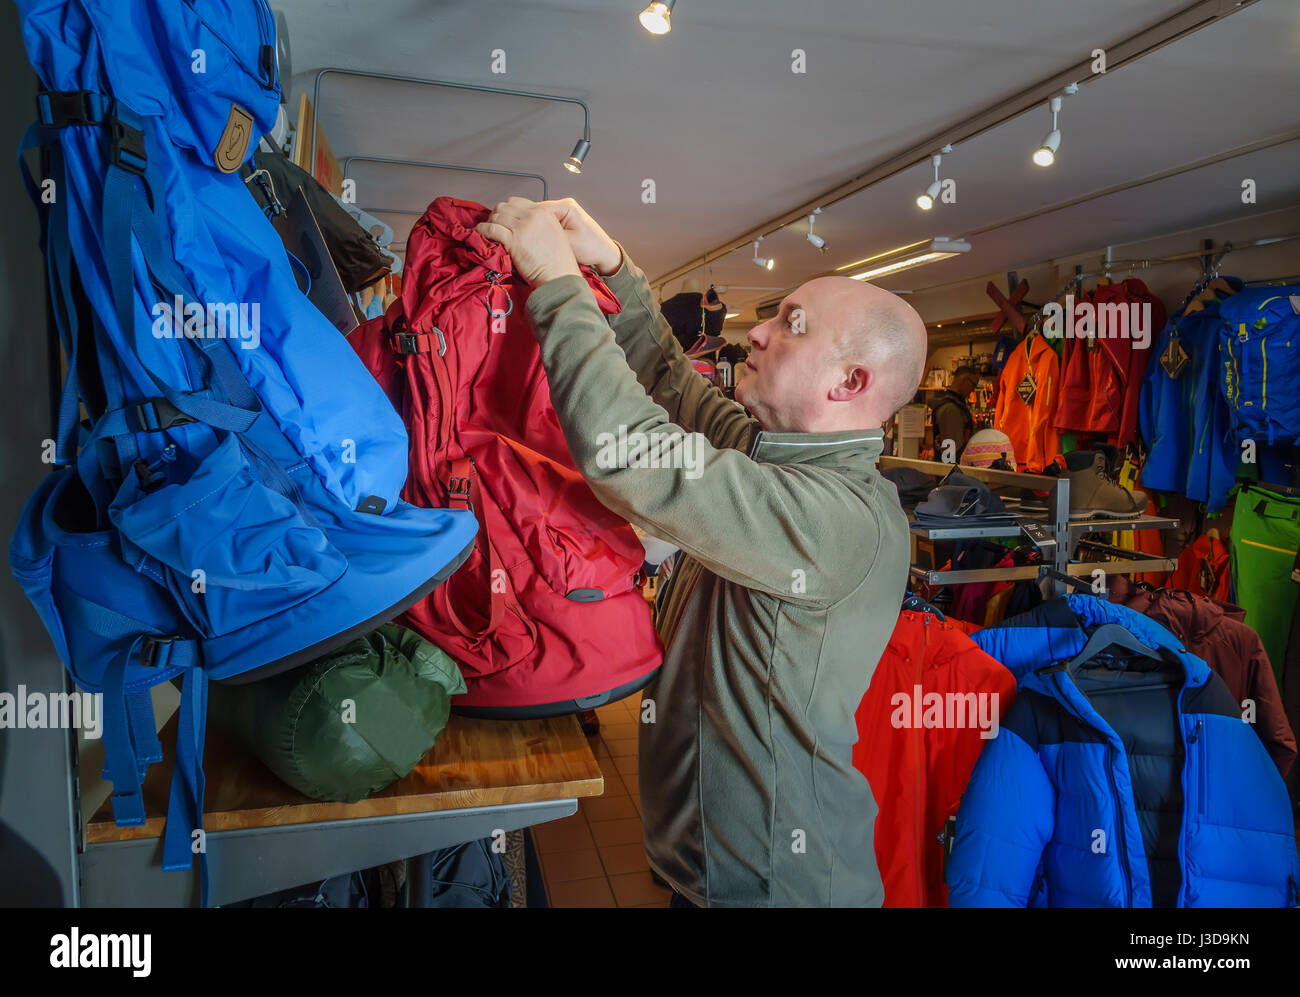 Man shopping for a backpack Stock Photo